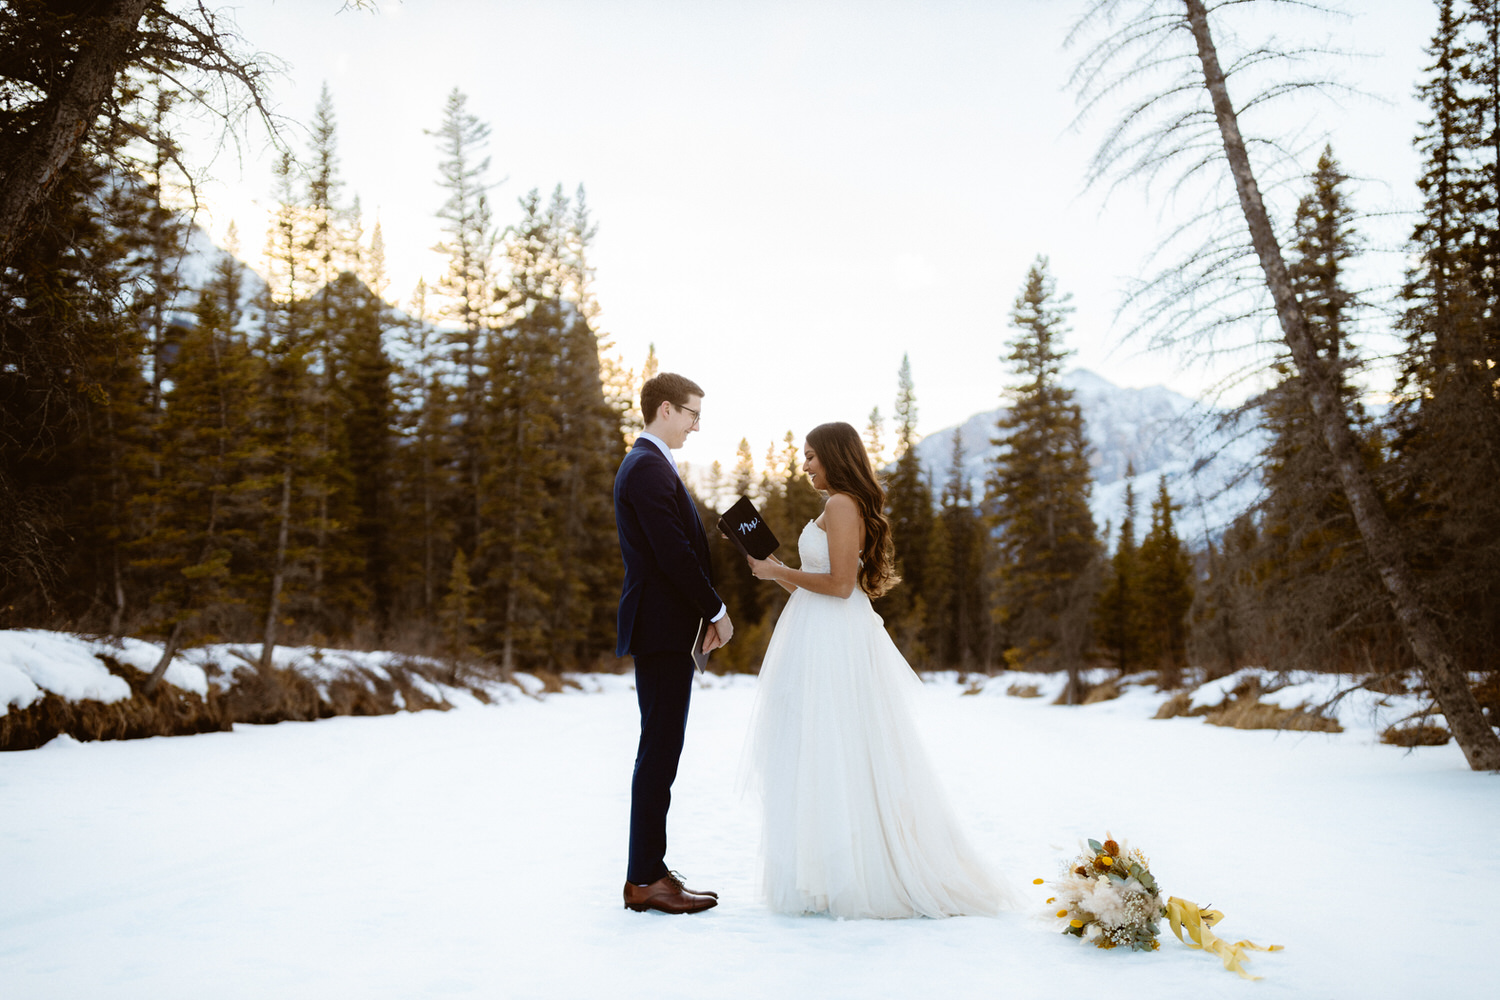 Canmore wedding videographer at a winter elopement ceremony